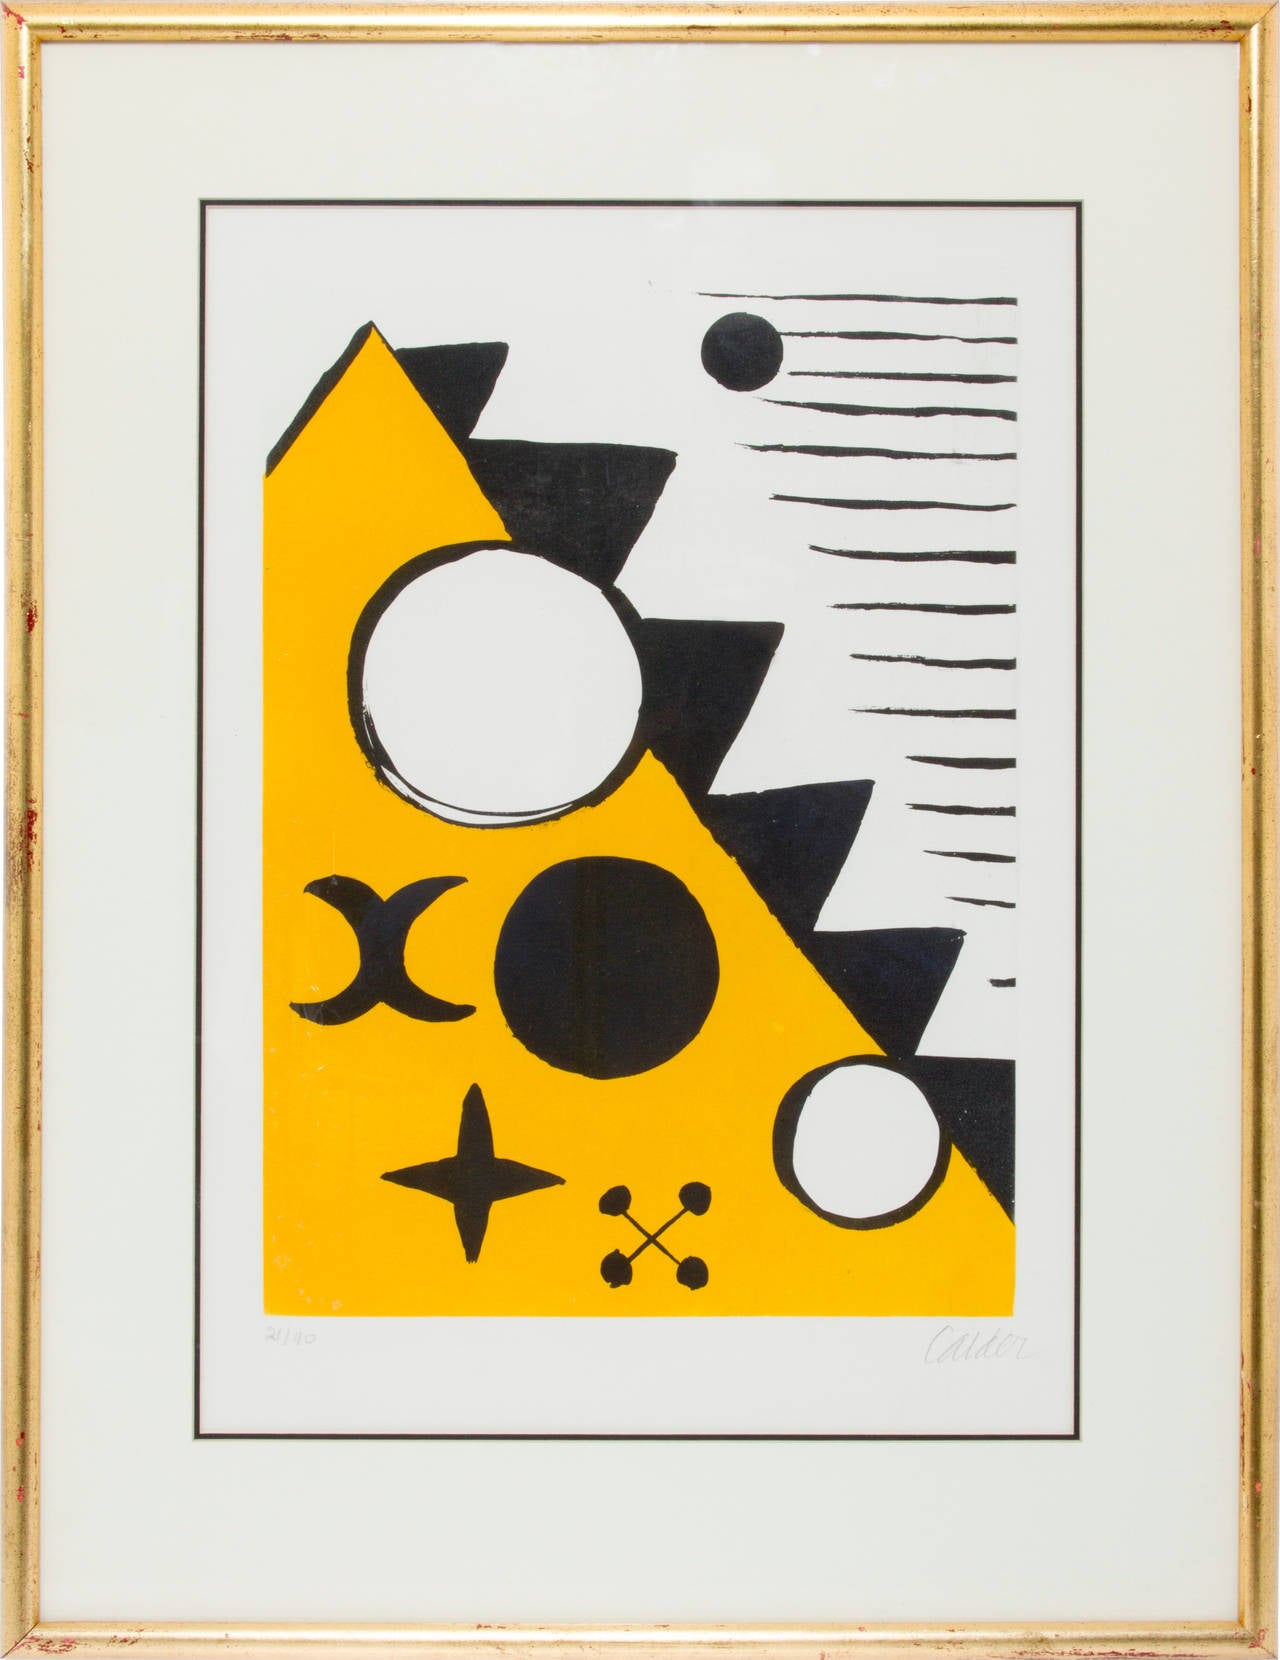 This is a wonderful and unusual Alexander Calder lithograph; pencil signed and is number 21 out of an edition of 90. The title translates to Saw and Balls.

The print itself measures 21 1/2" by 15".